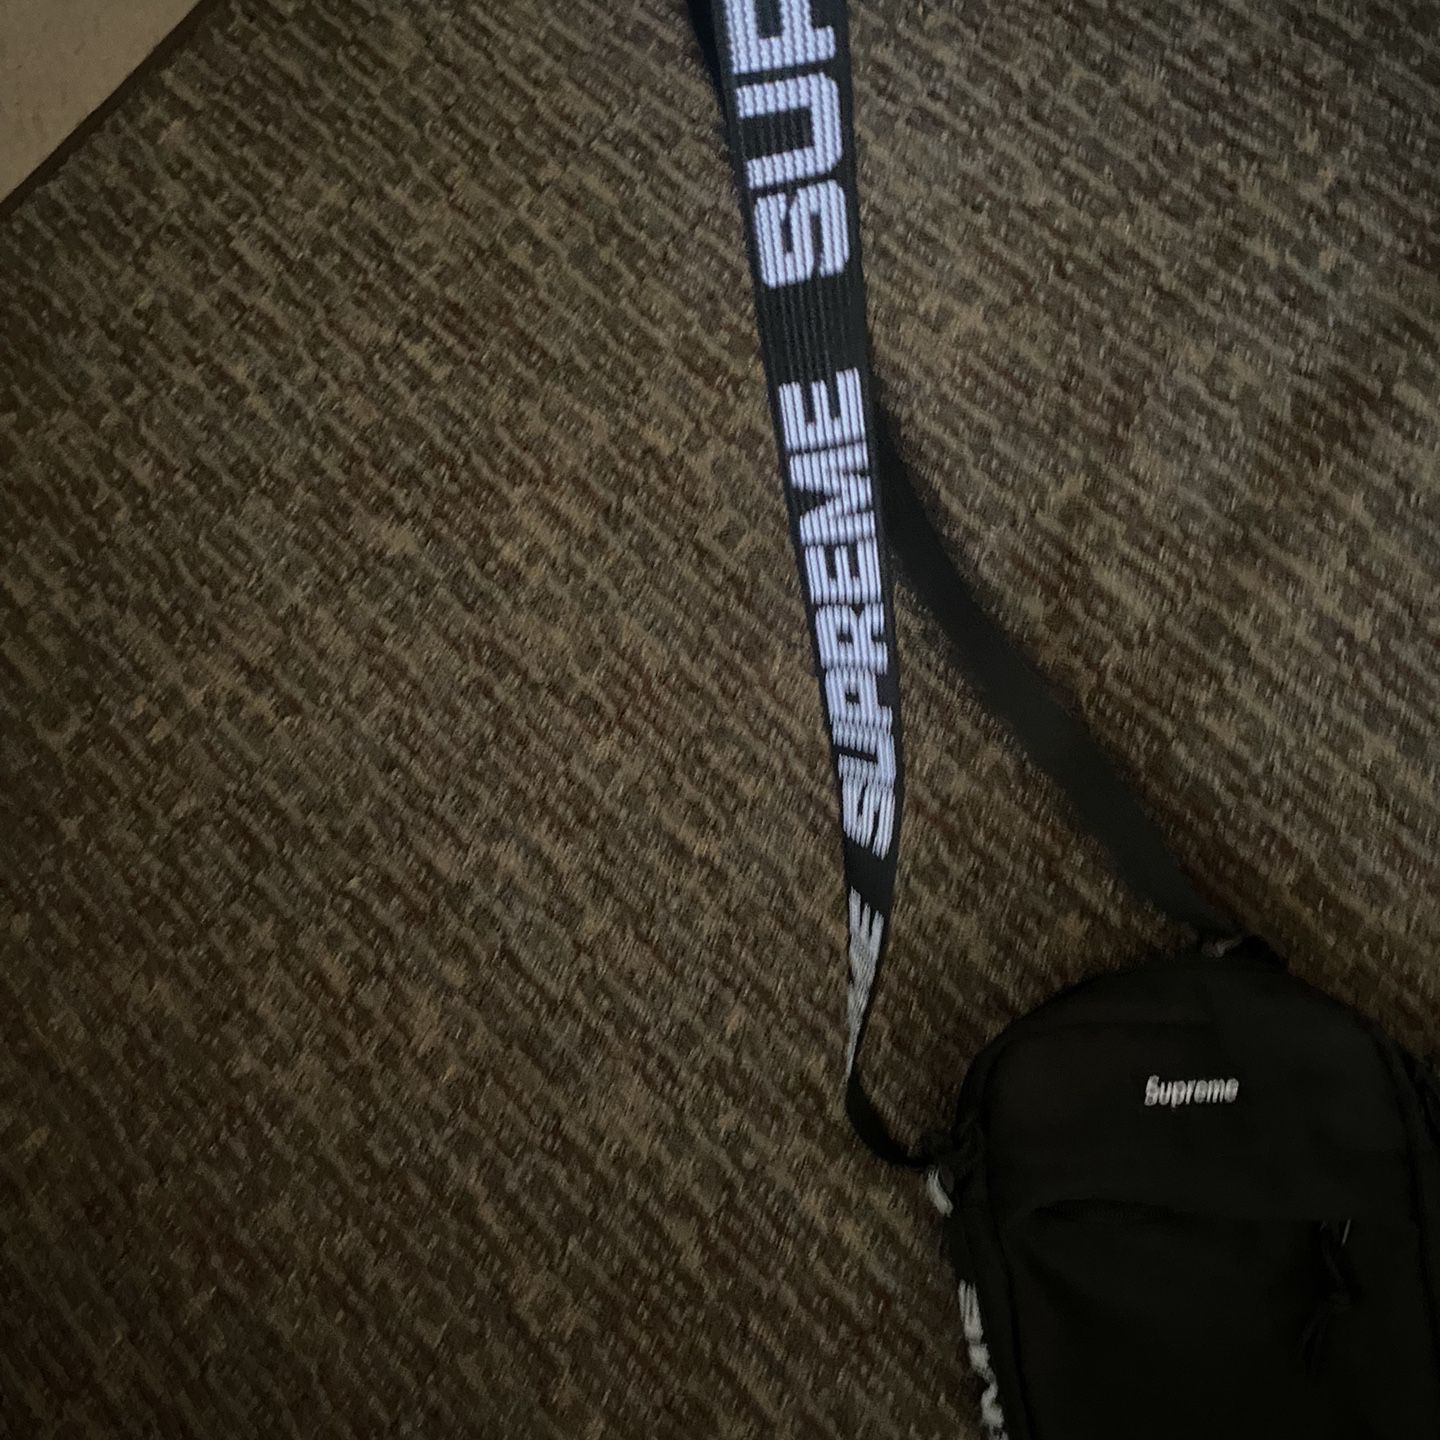 Supreme Waist Bag (SS18) Royal for Sale in Manteca, CA - OfferUp